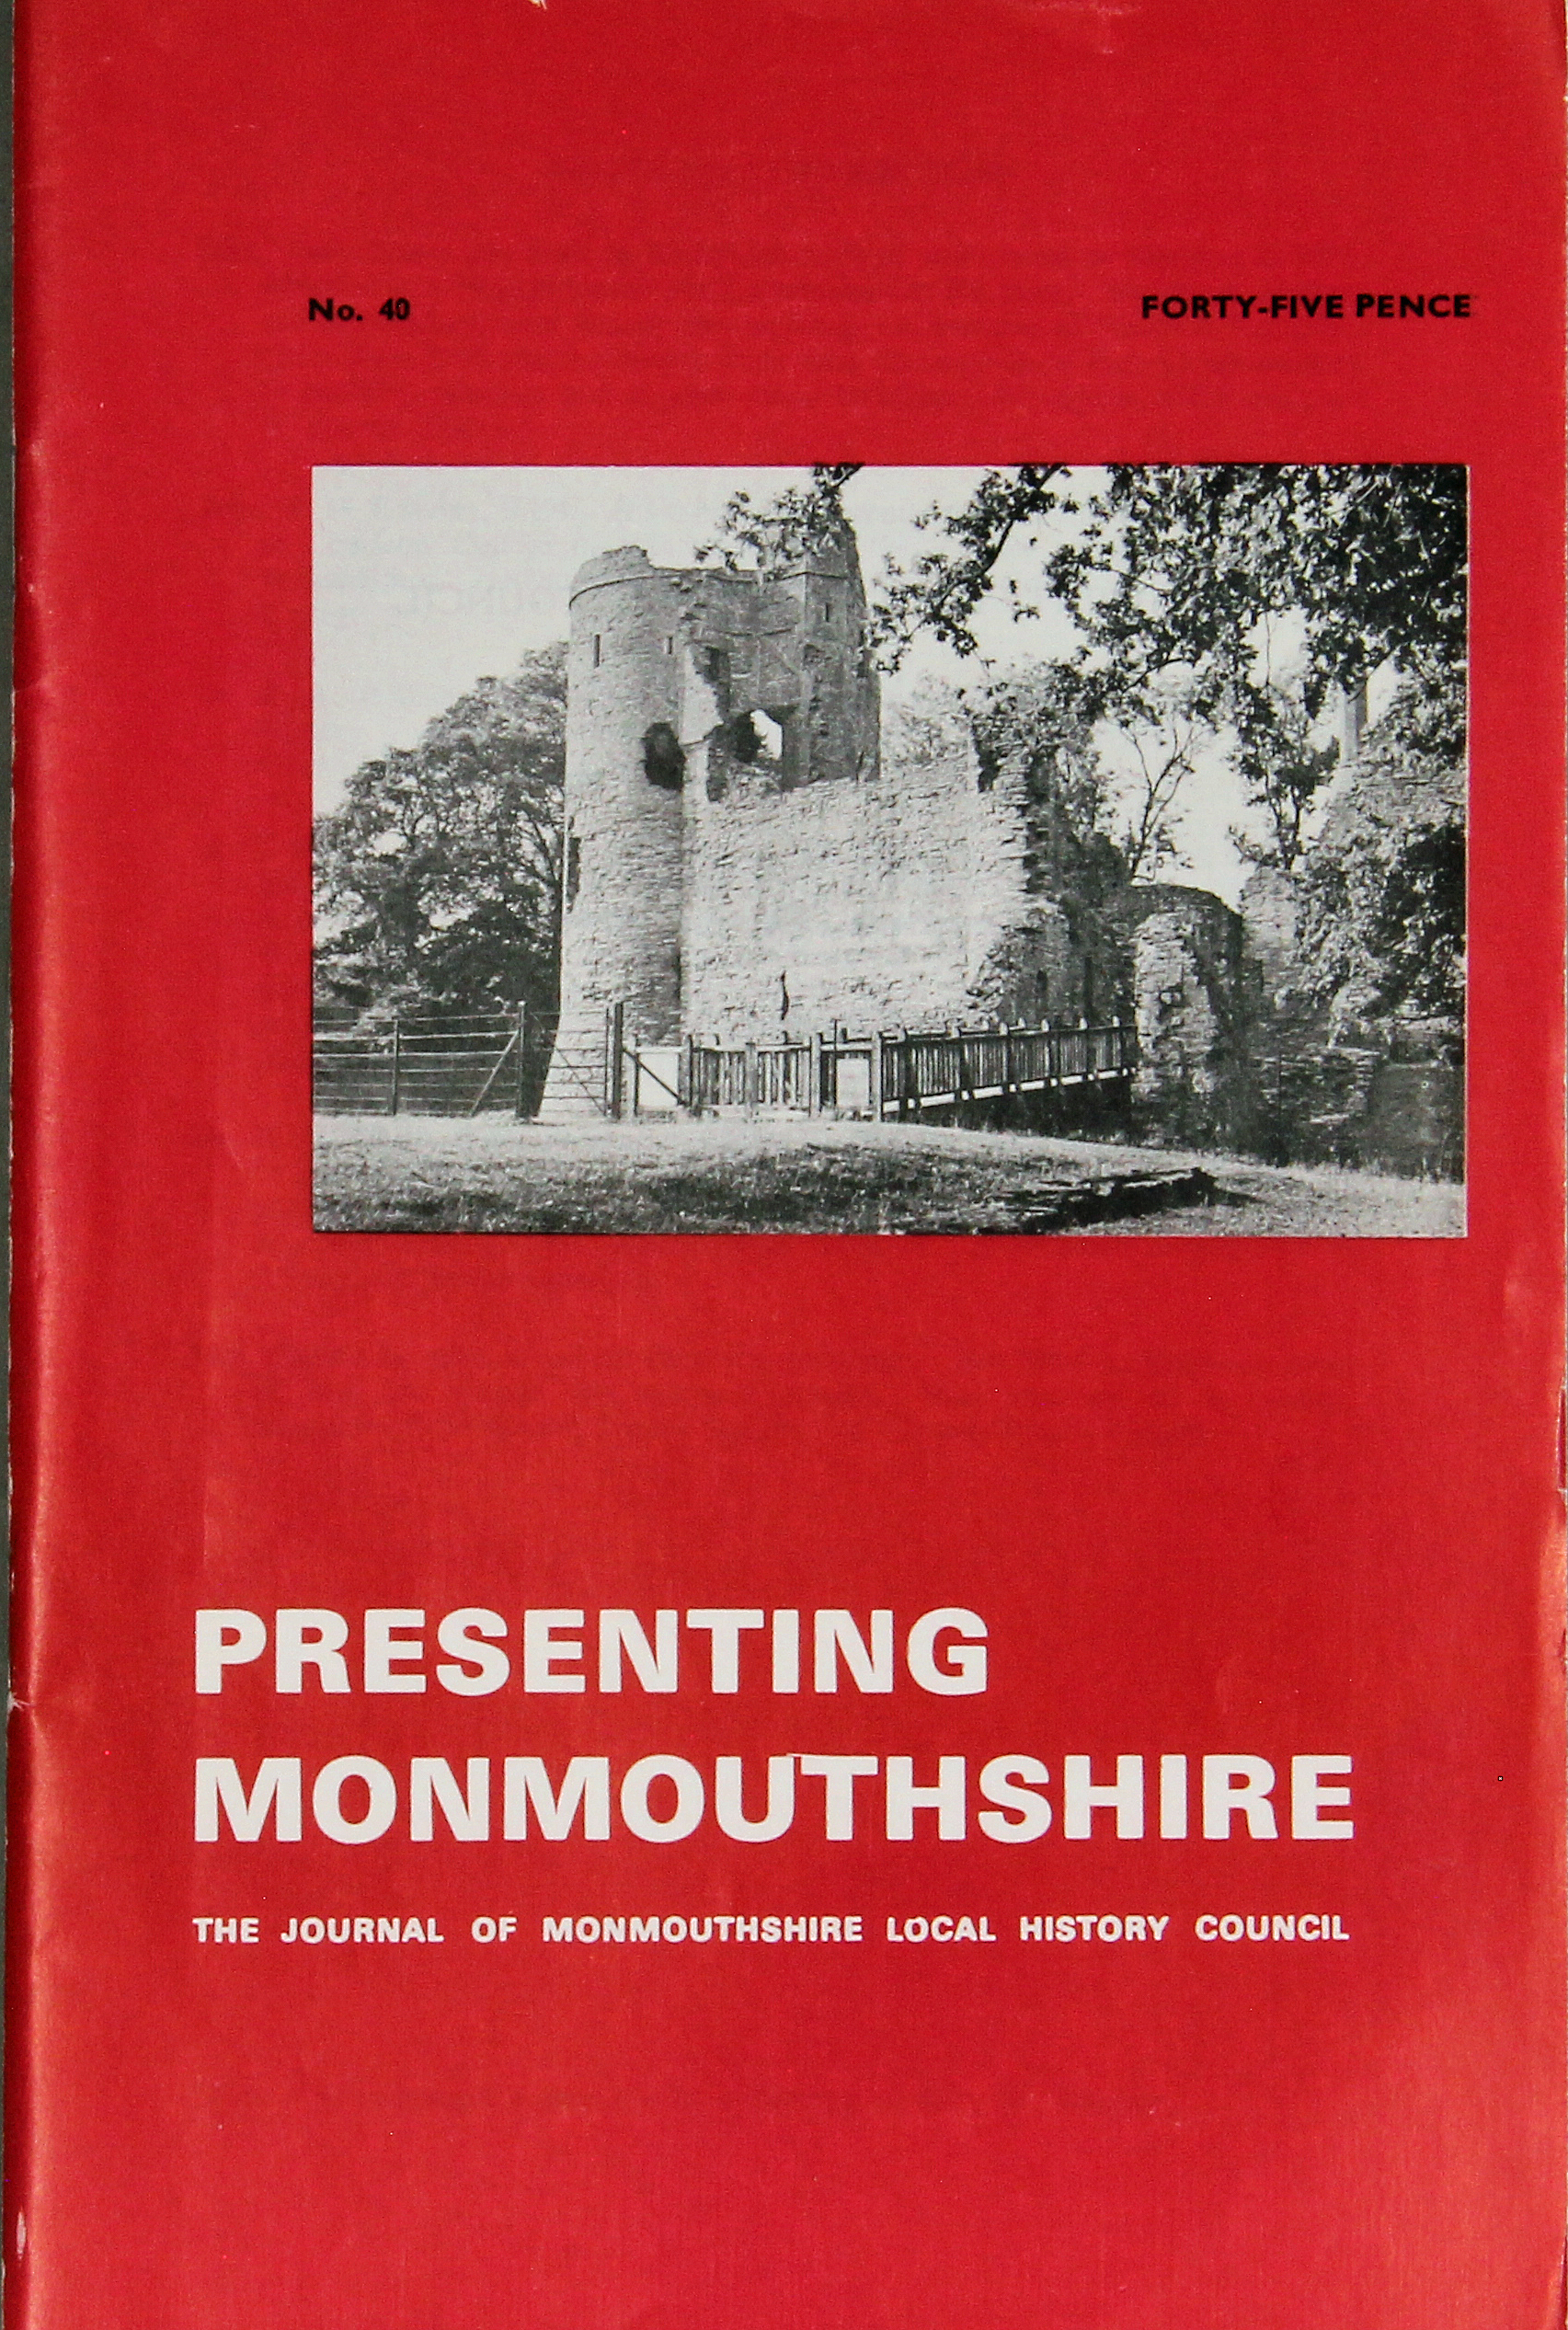 Presenting Monmouthshire: The Journal of Monmouthshire Local History No.40,  £0.20